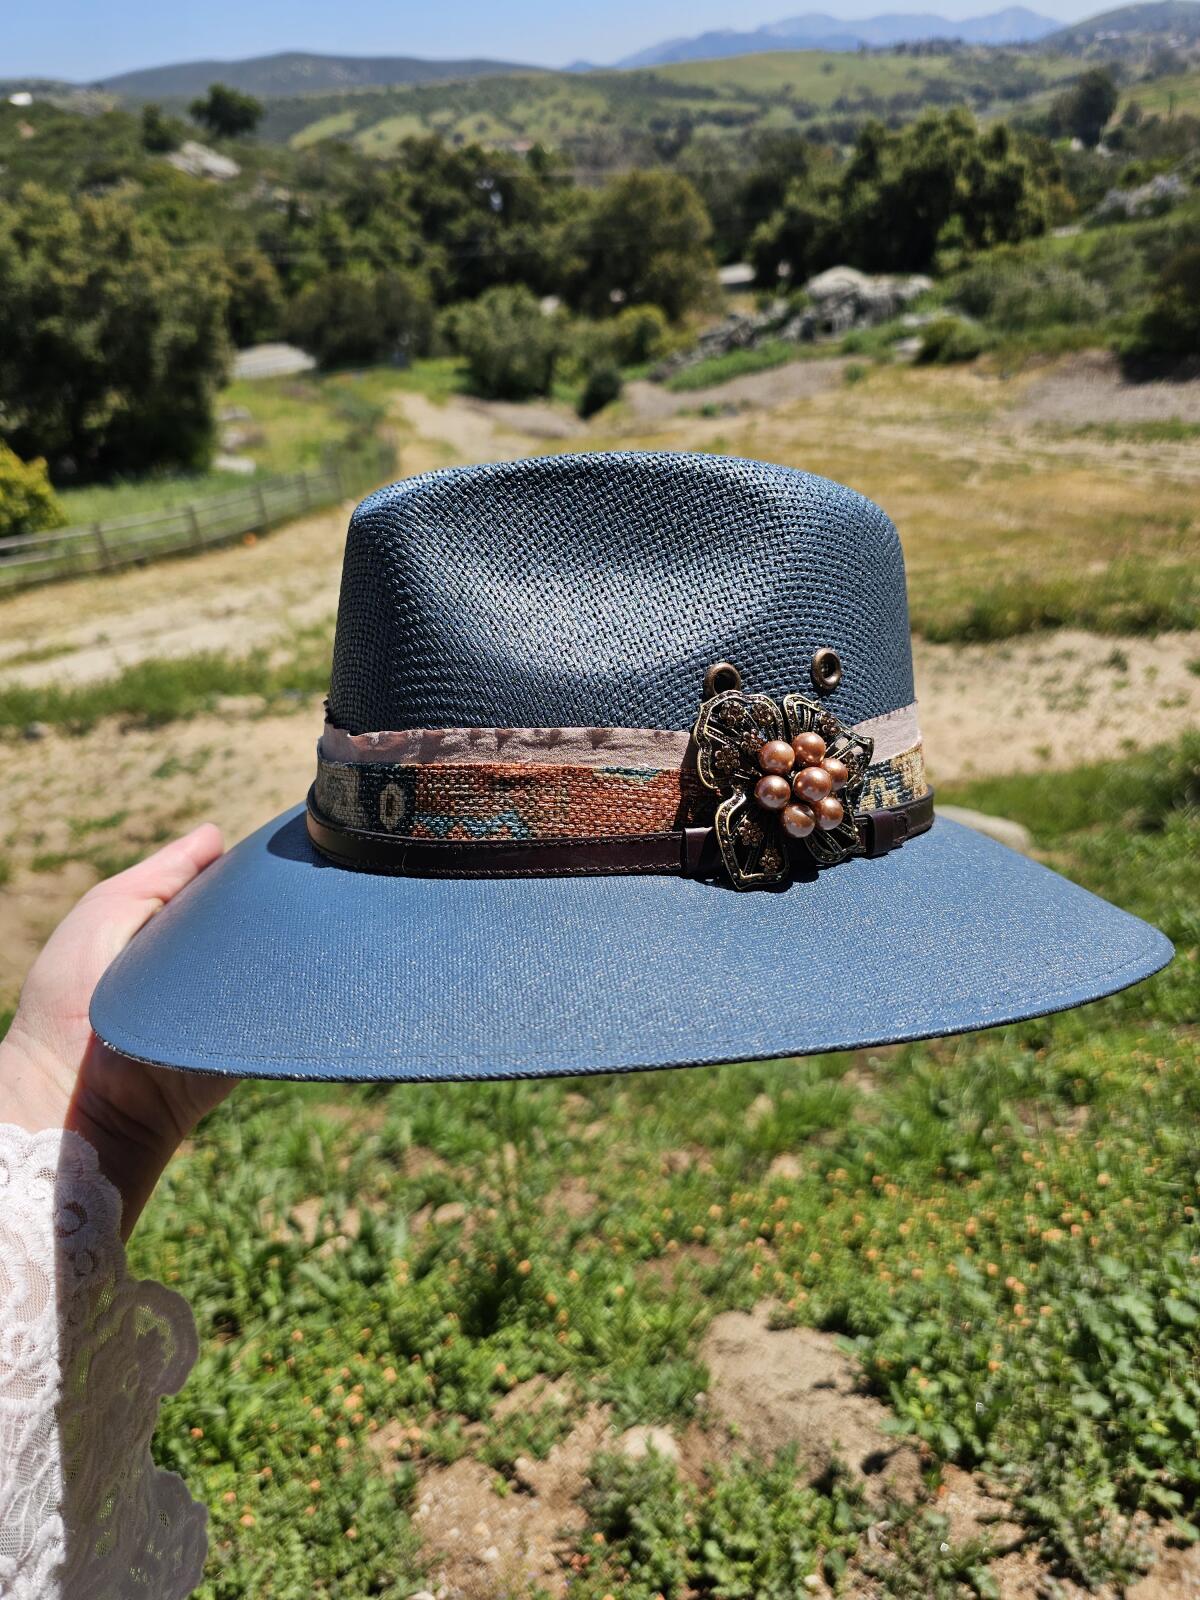 This blue hat brooch was picked up by Terry Kearns, co-owner of Ramona Ranch Winery, at a flea market in France.  